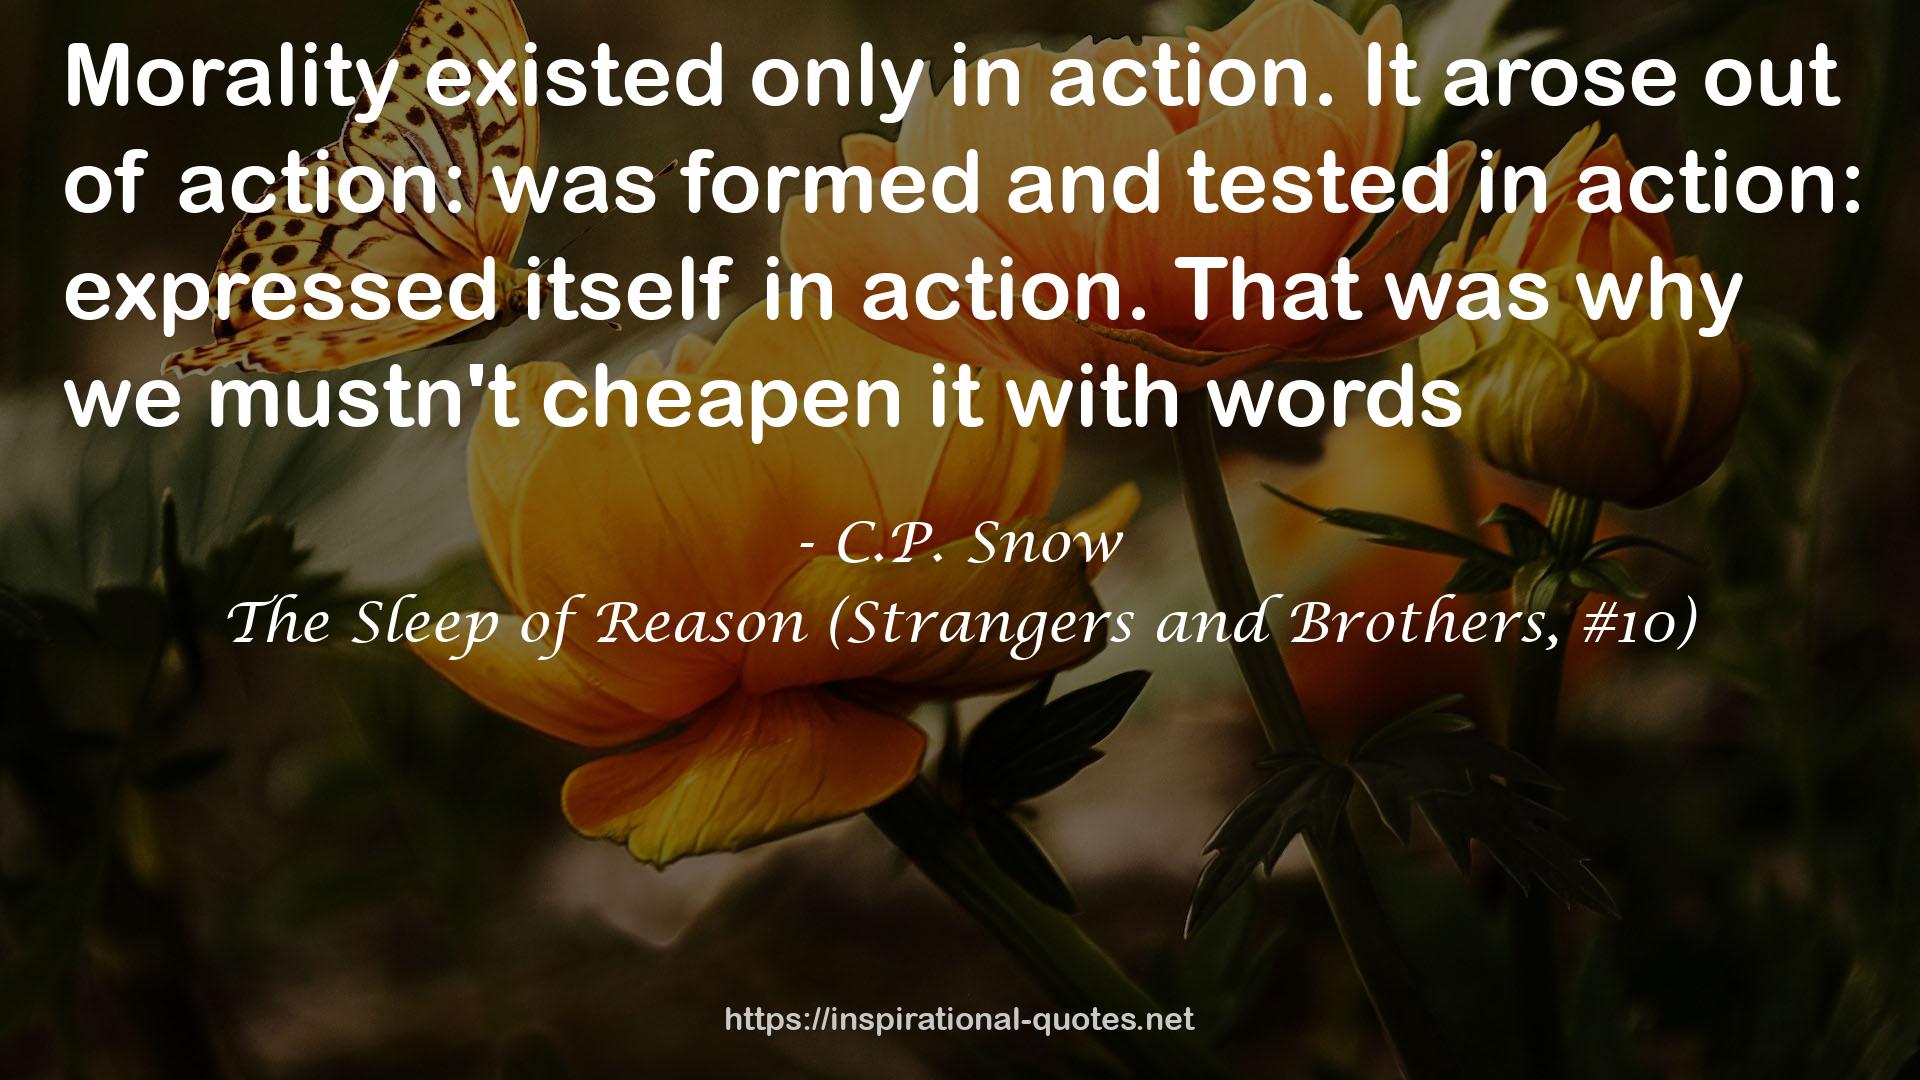 The Sleep of Reason (Strangers and Brothers, #10) QUOTES